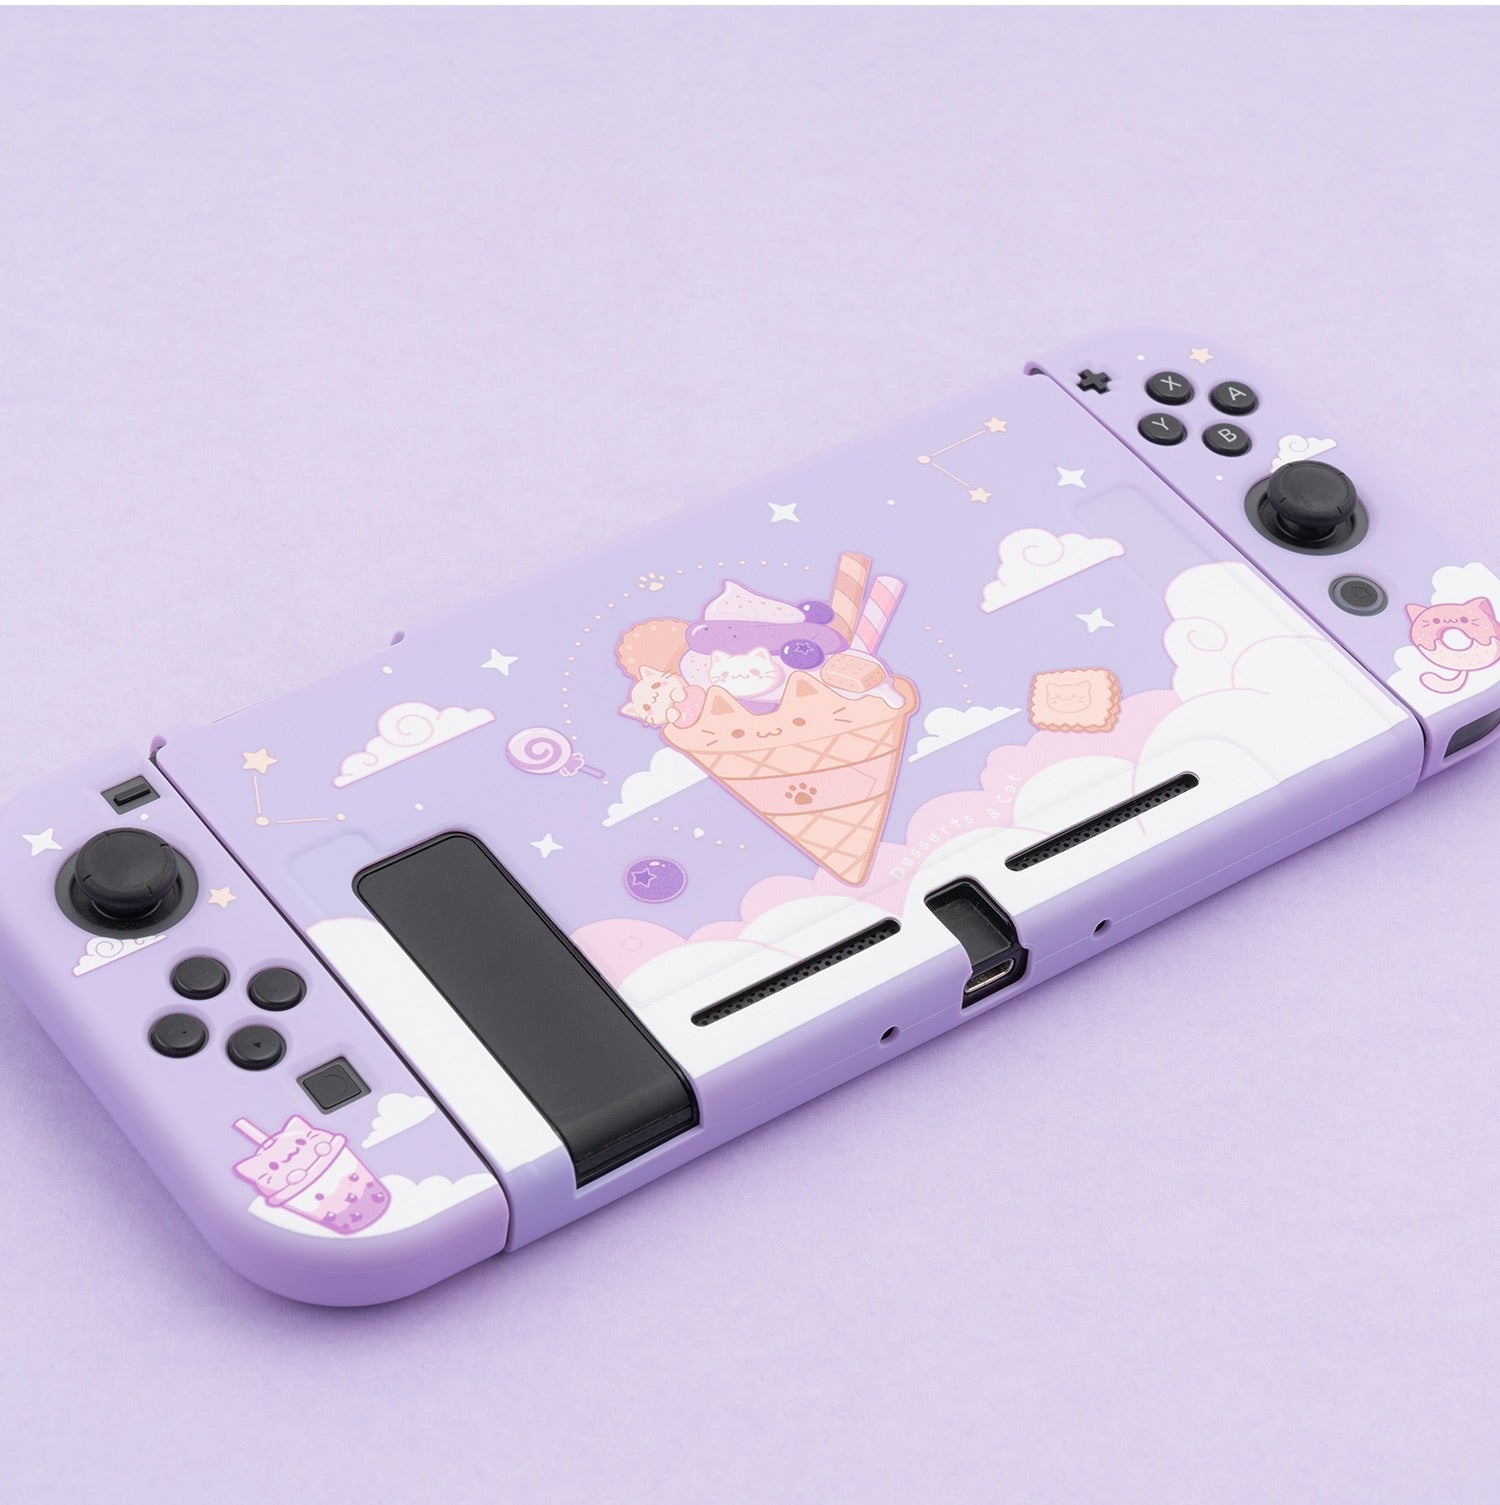 Purple Ice Cream Cat Pastel colors__Nintendo Switch Protection Casing Cover